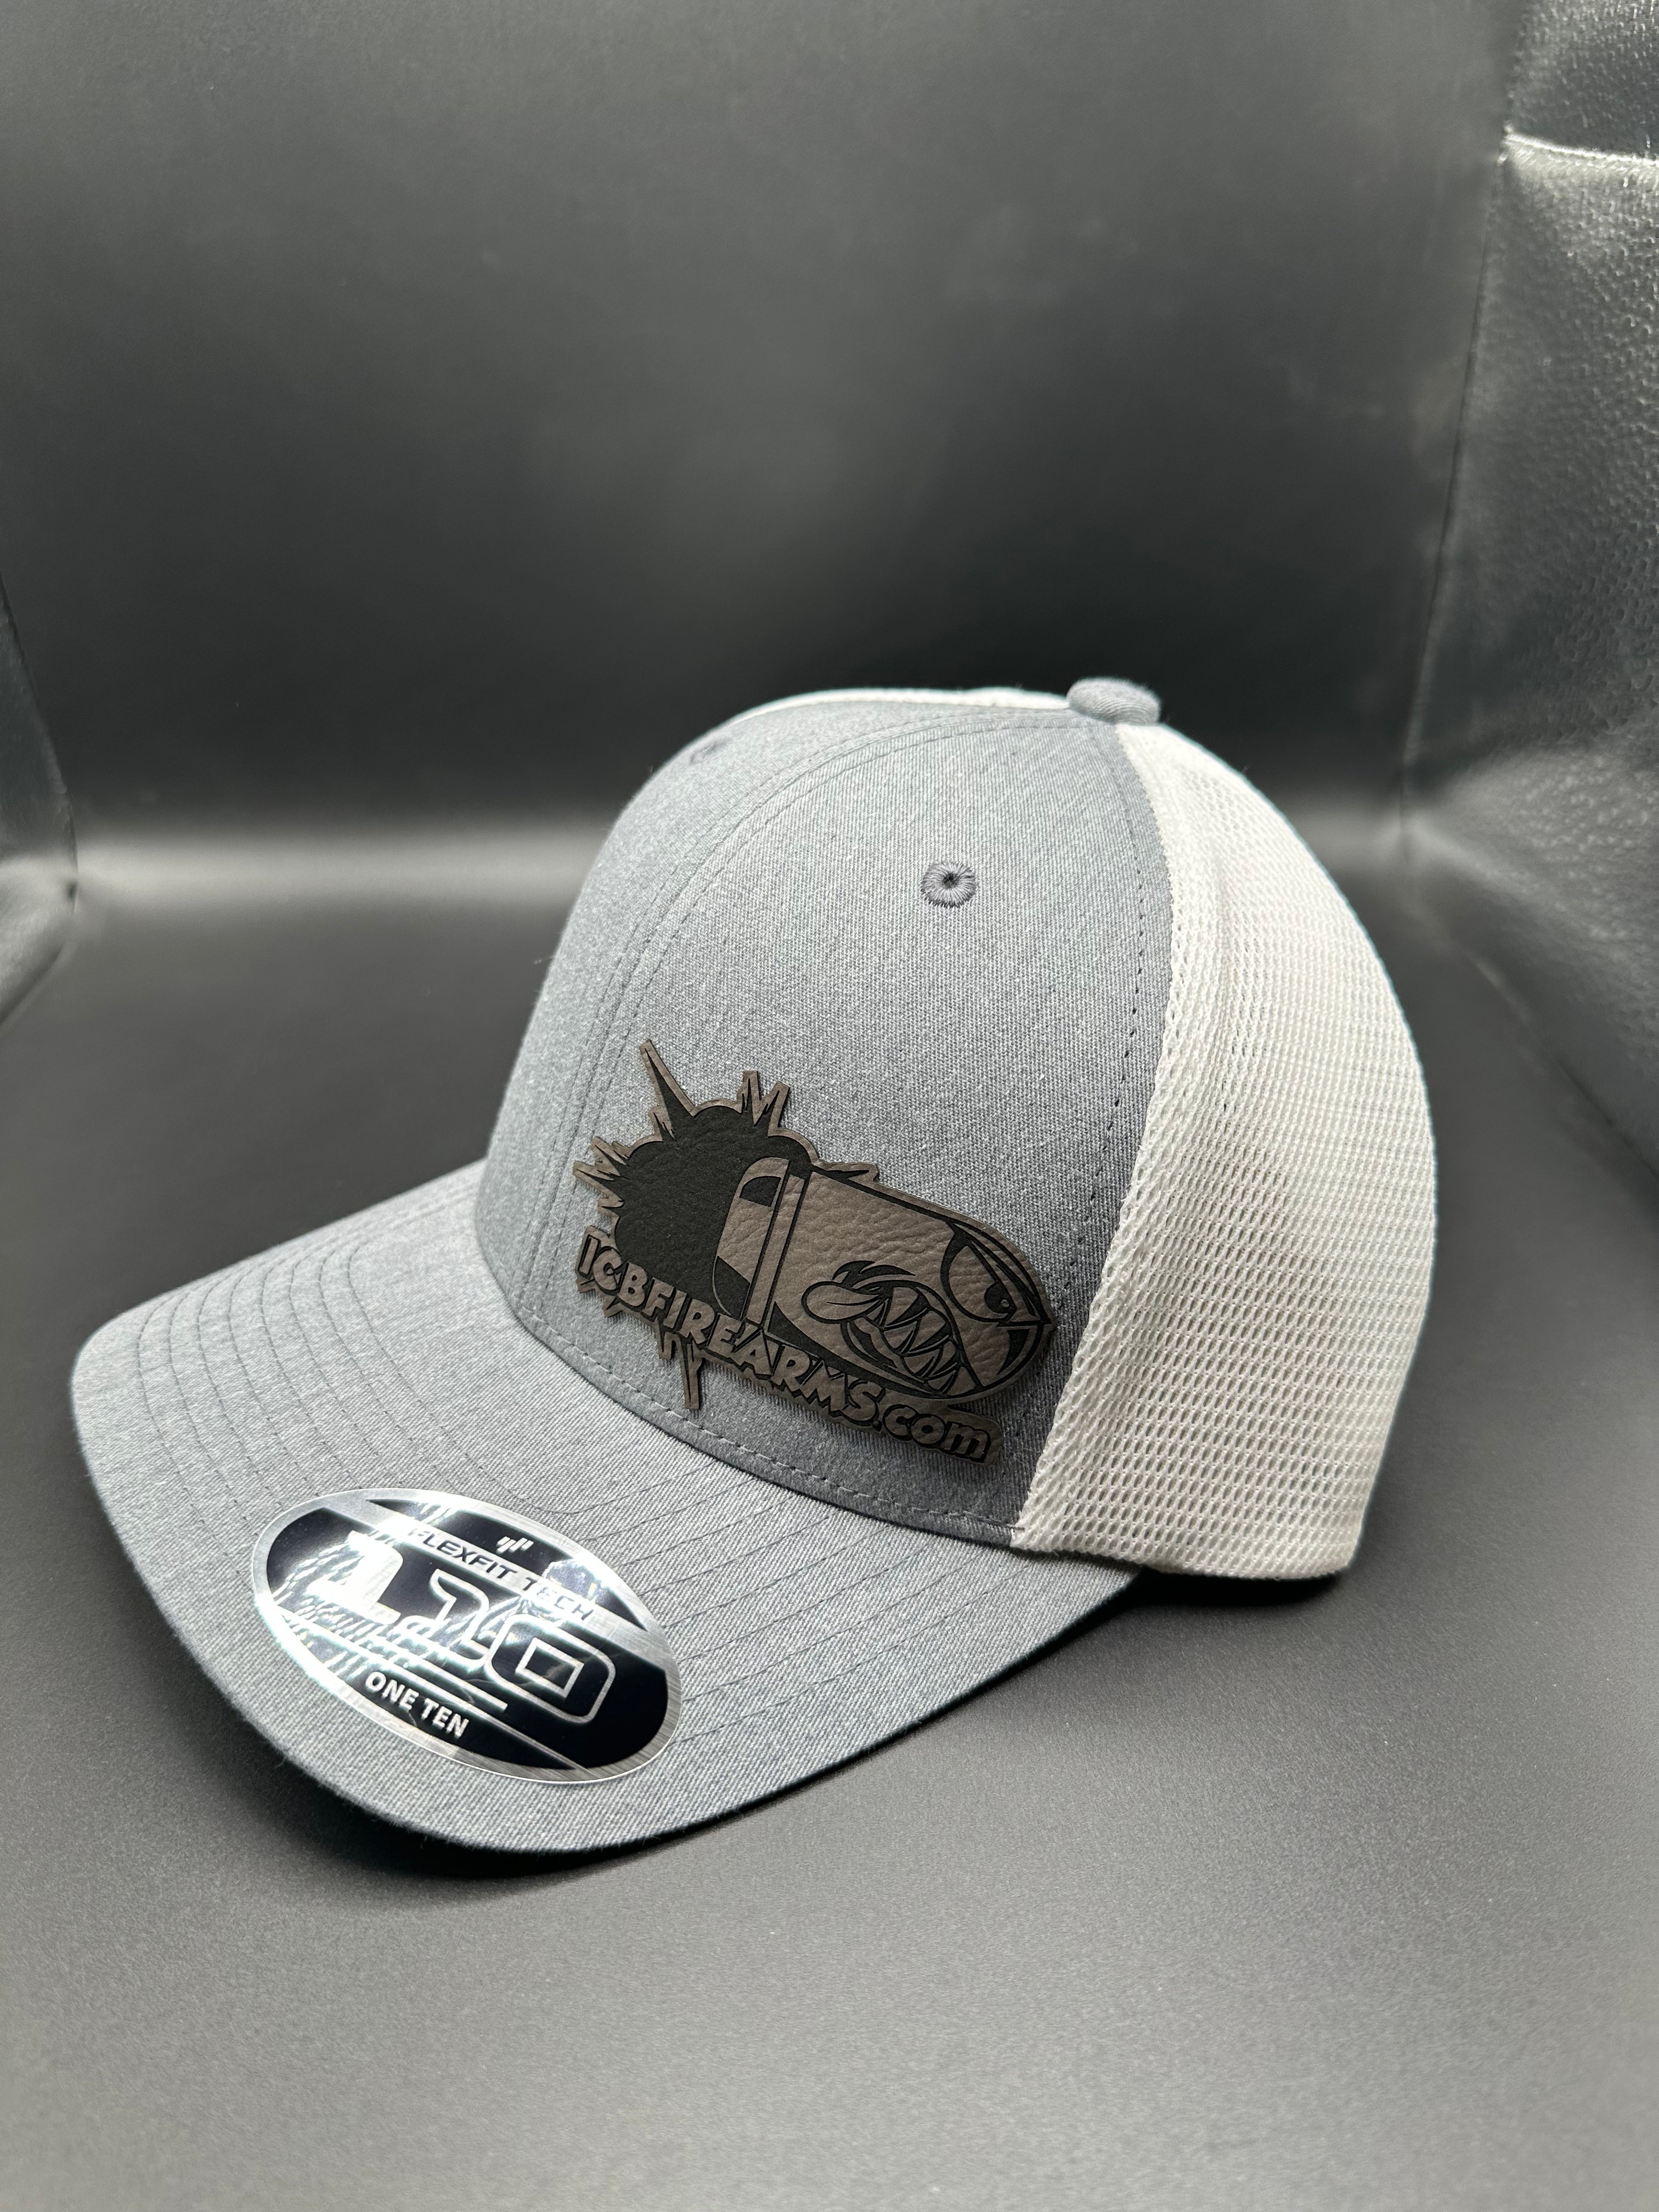 SnapBack ICB Warrior Engraving Flags – And Heather FlexFit Grey/White